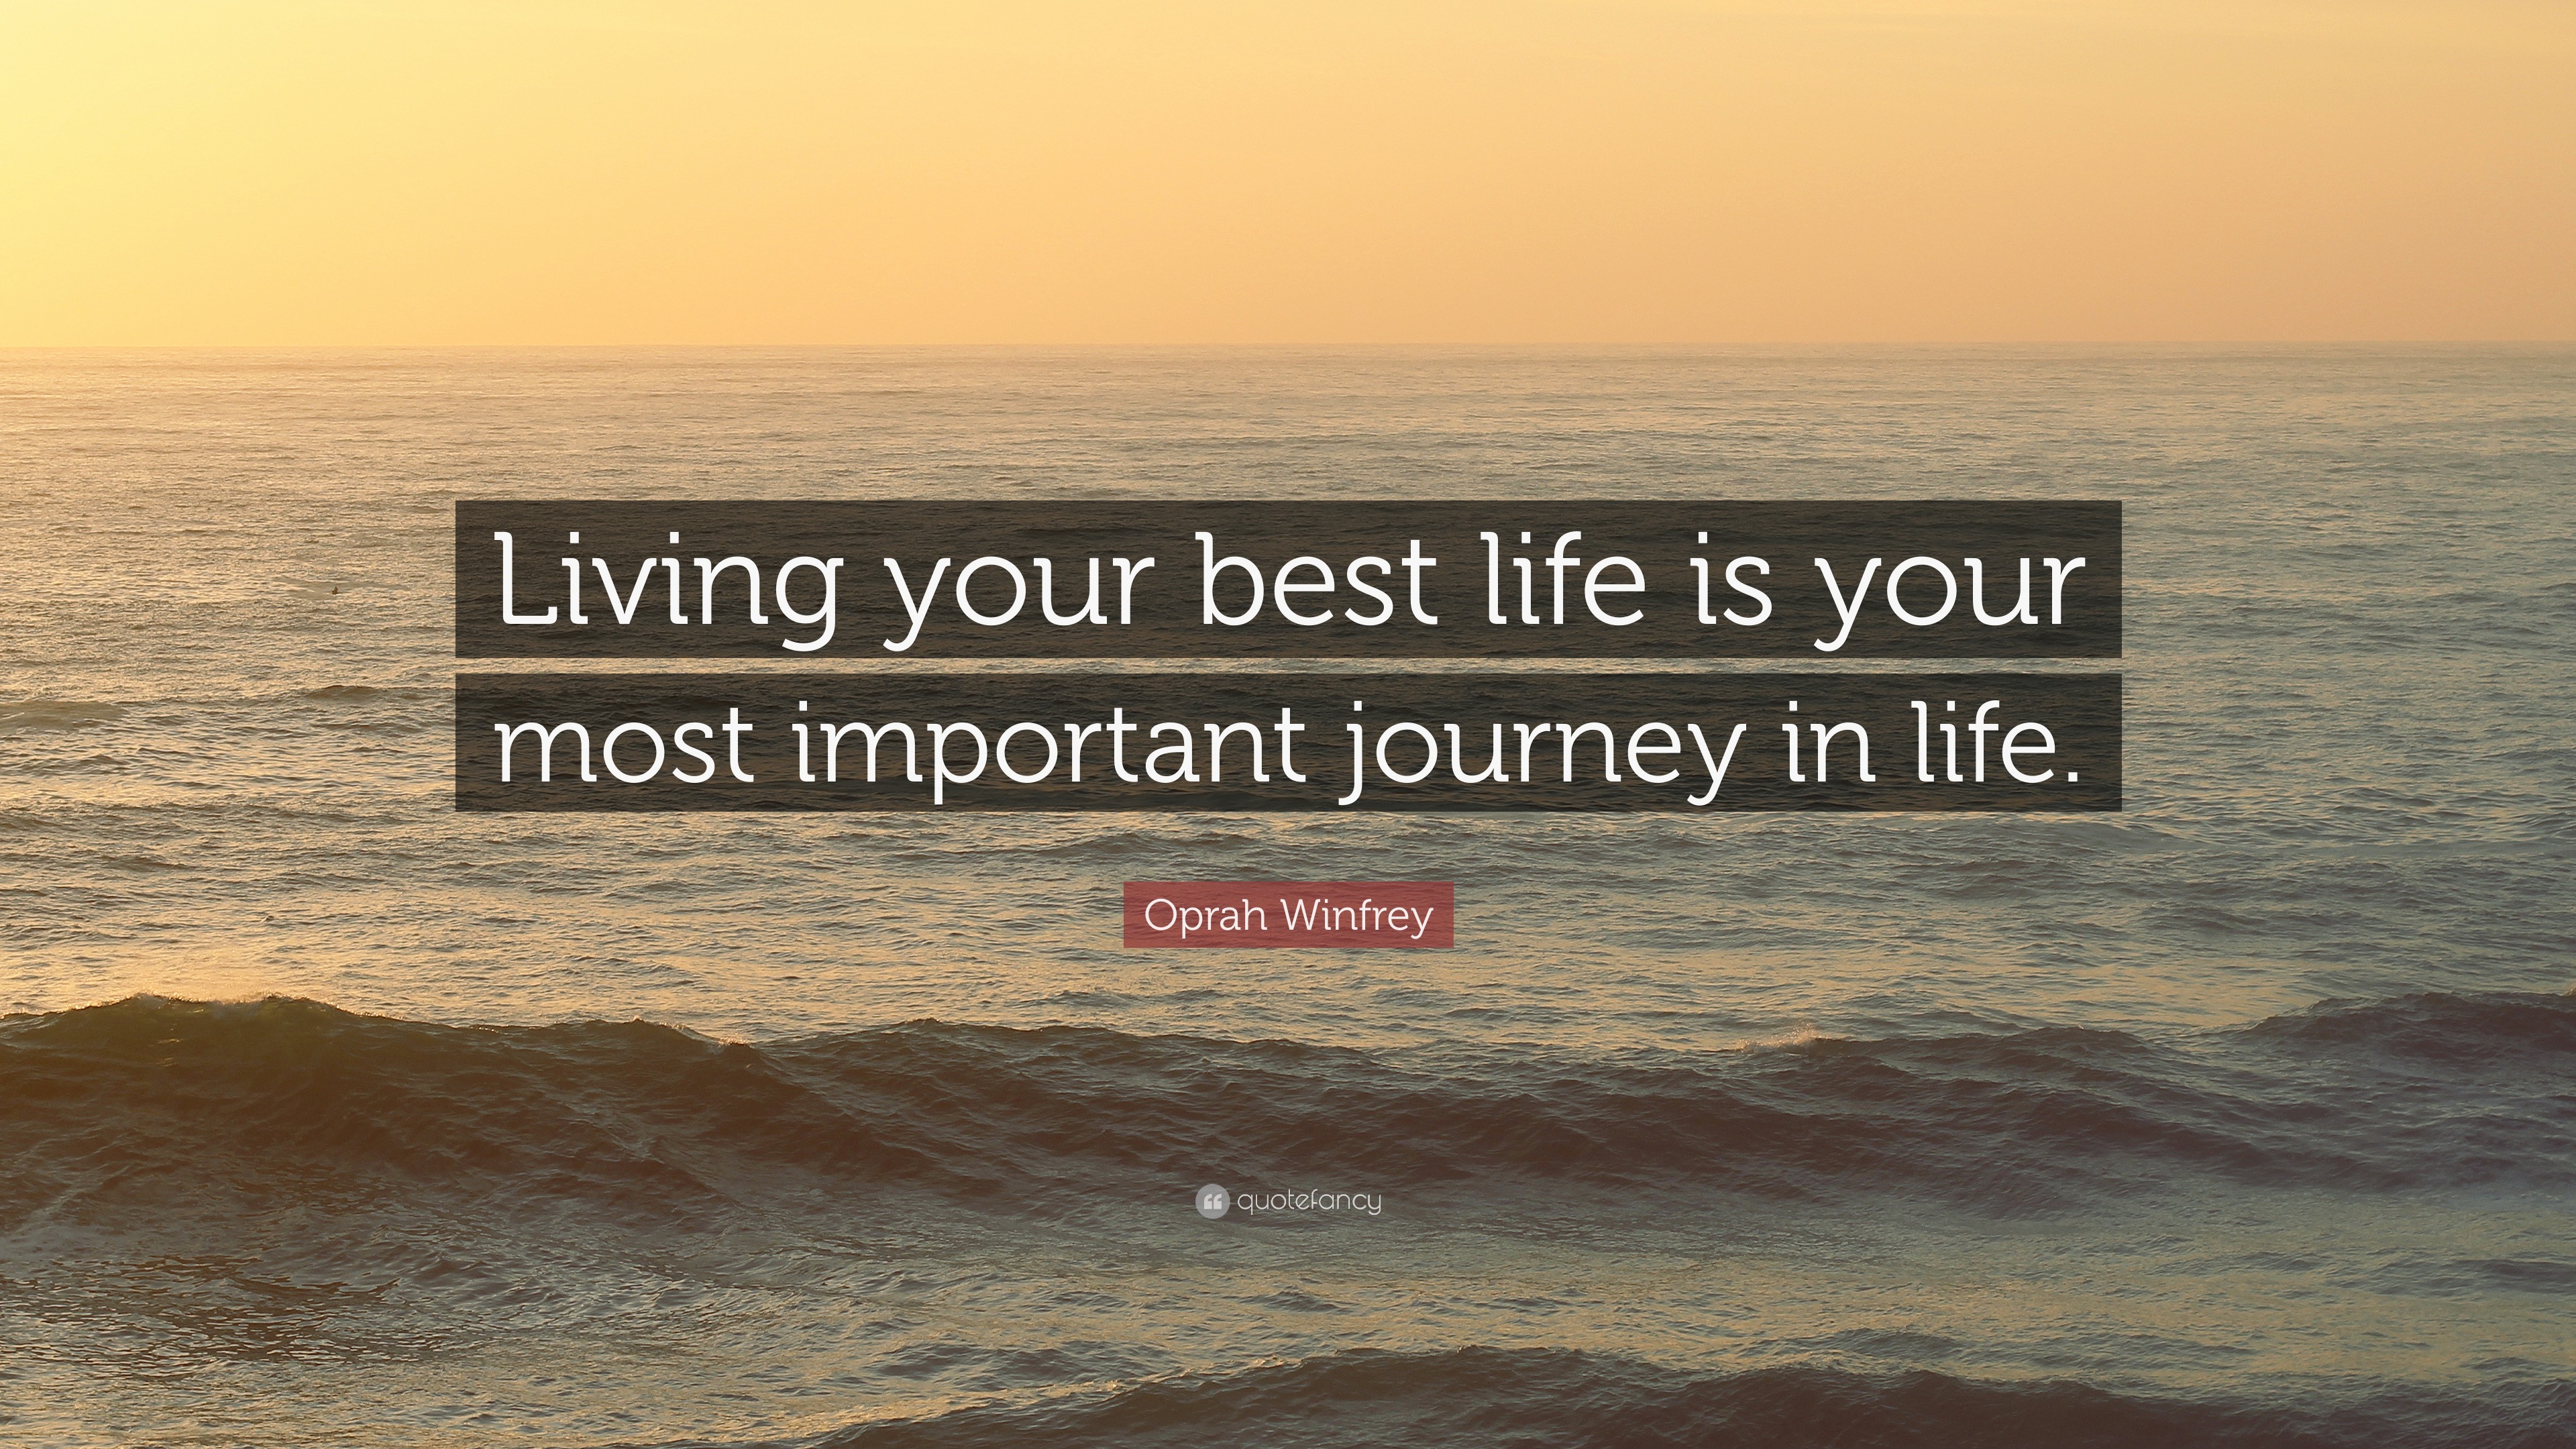 Oprah Winfrey Quote: “Living your best life is your most important ...